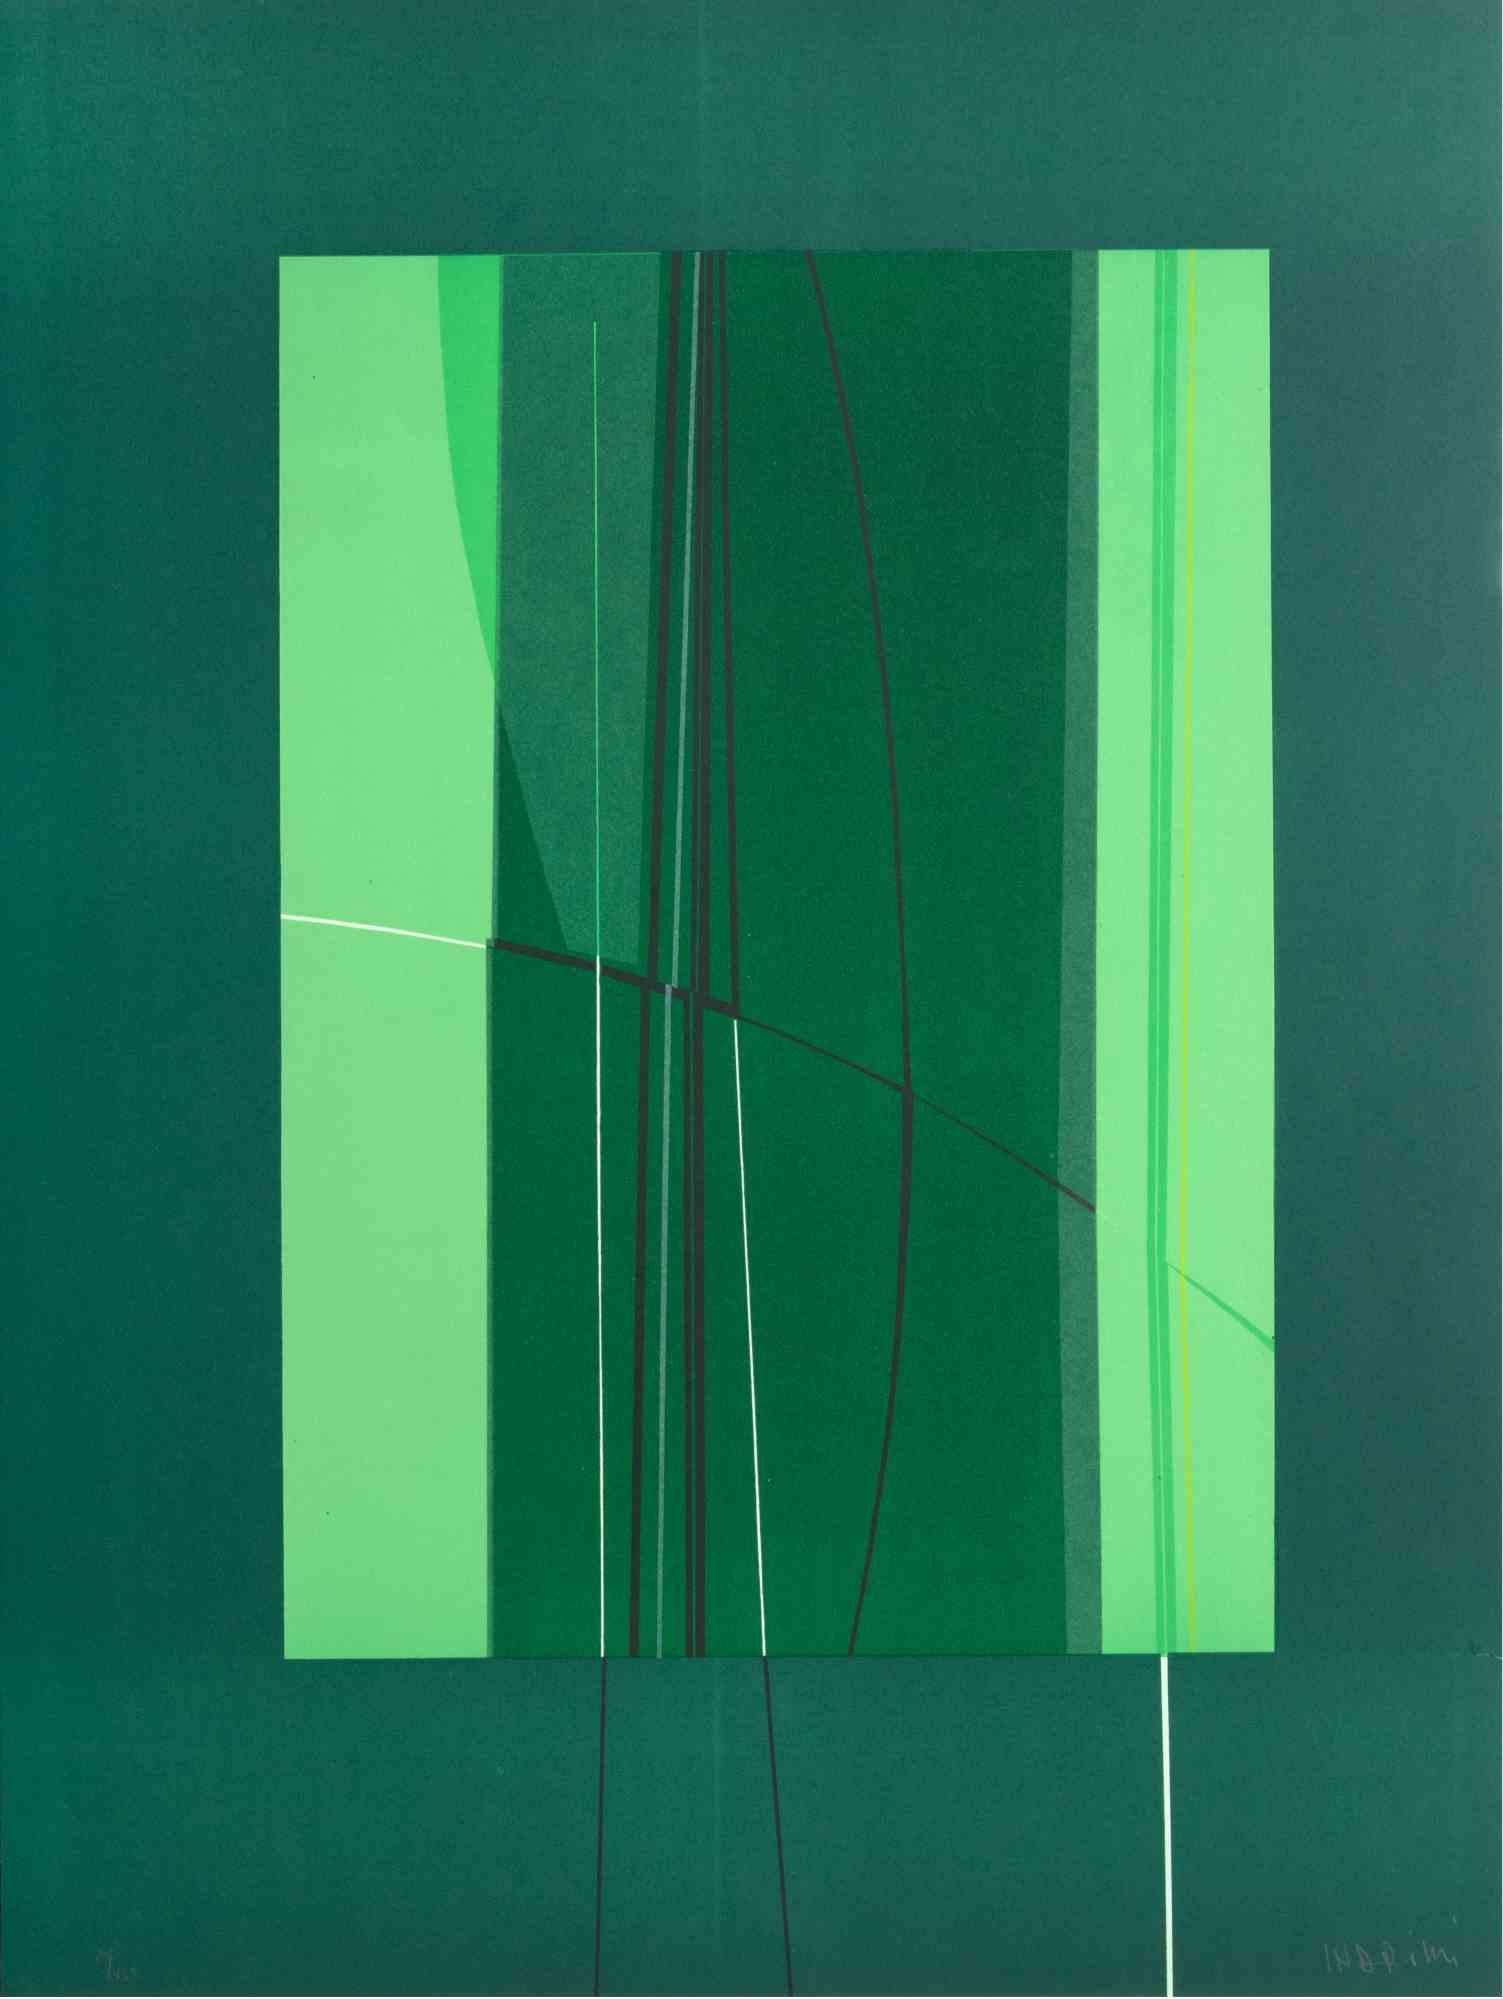 Green - Lithograph by Lorenzo Indrimi - 1970s